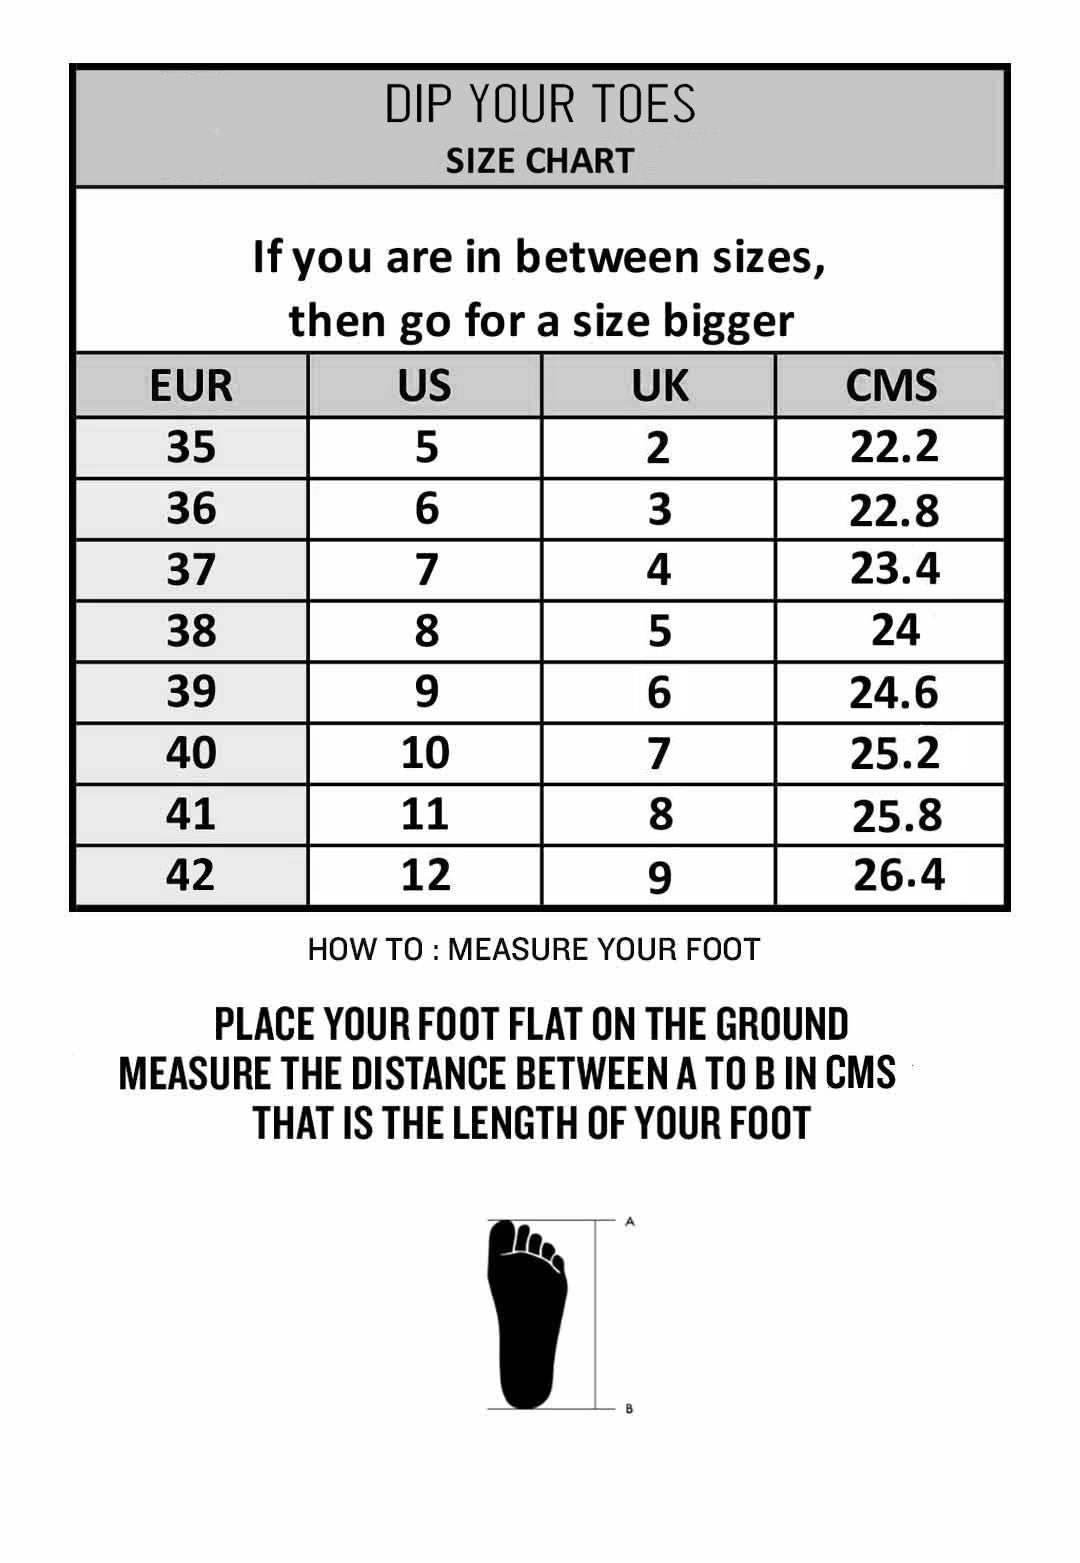 Size chart – Dip Your Toes